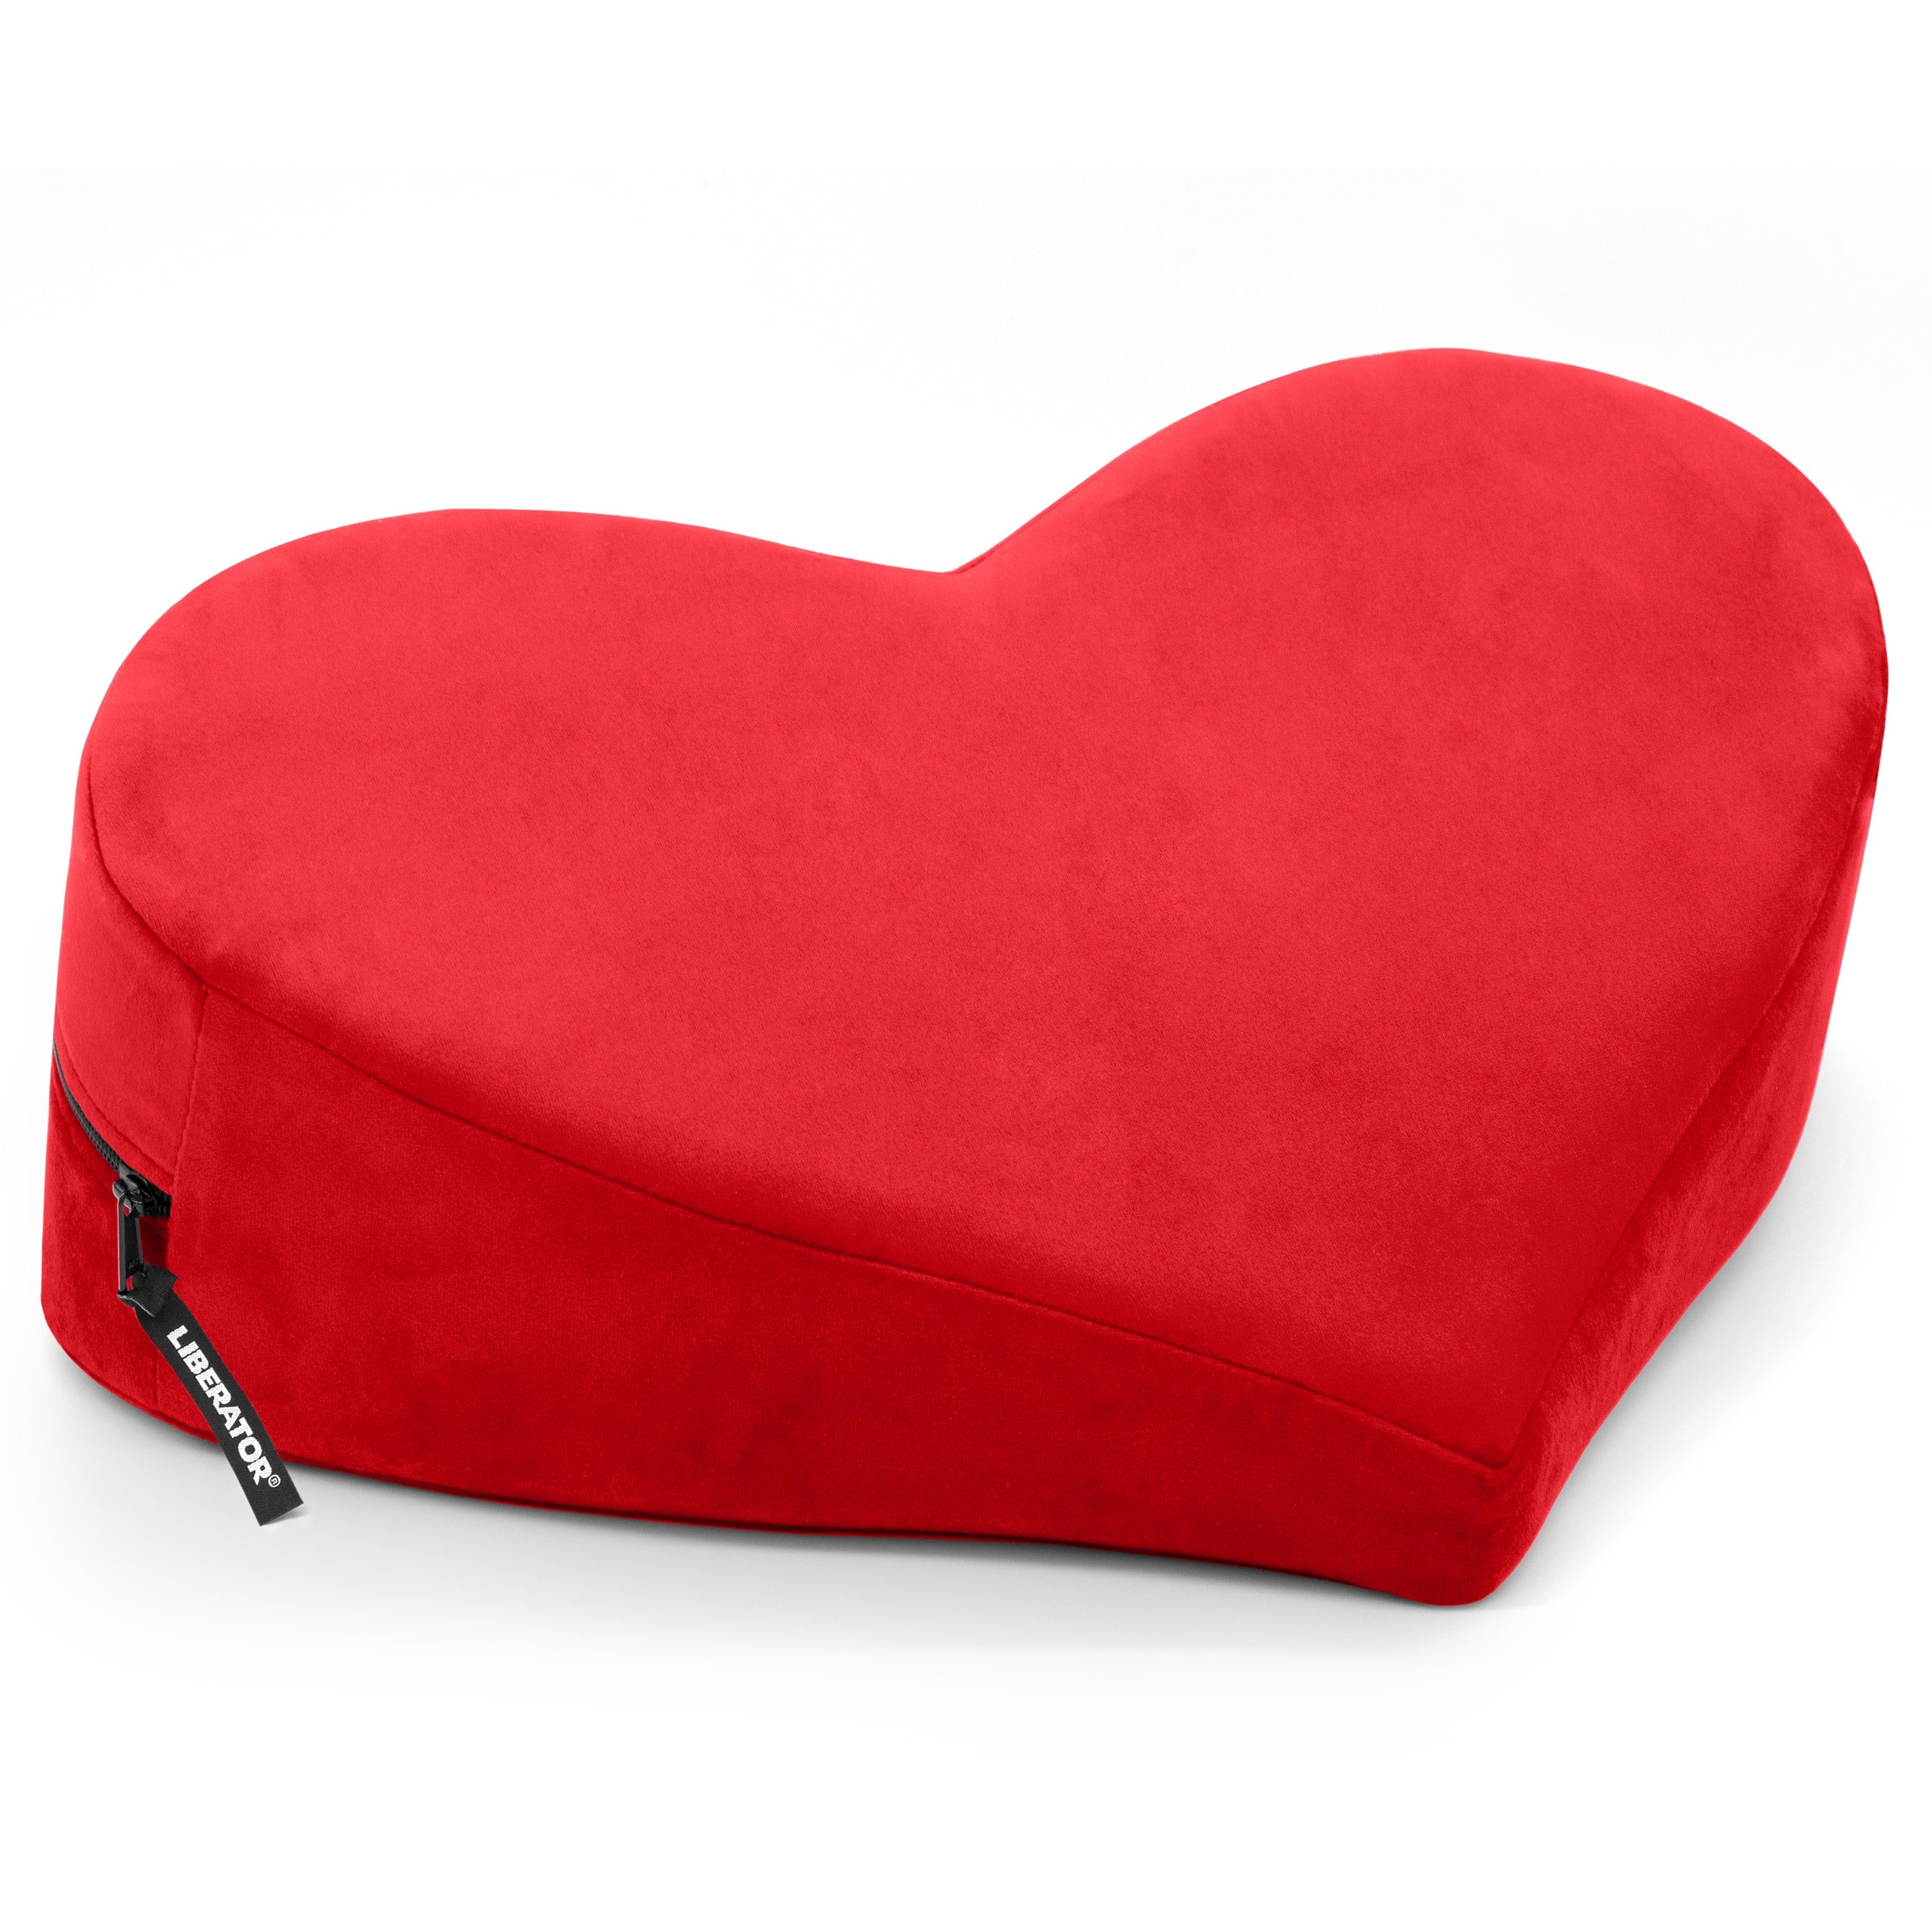 Liberator Heart Wedge Sex Pillow - Melody's Room